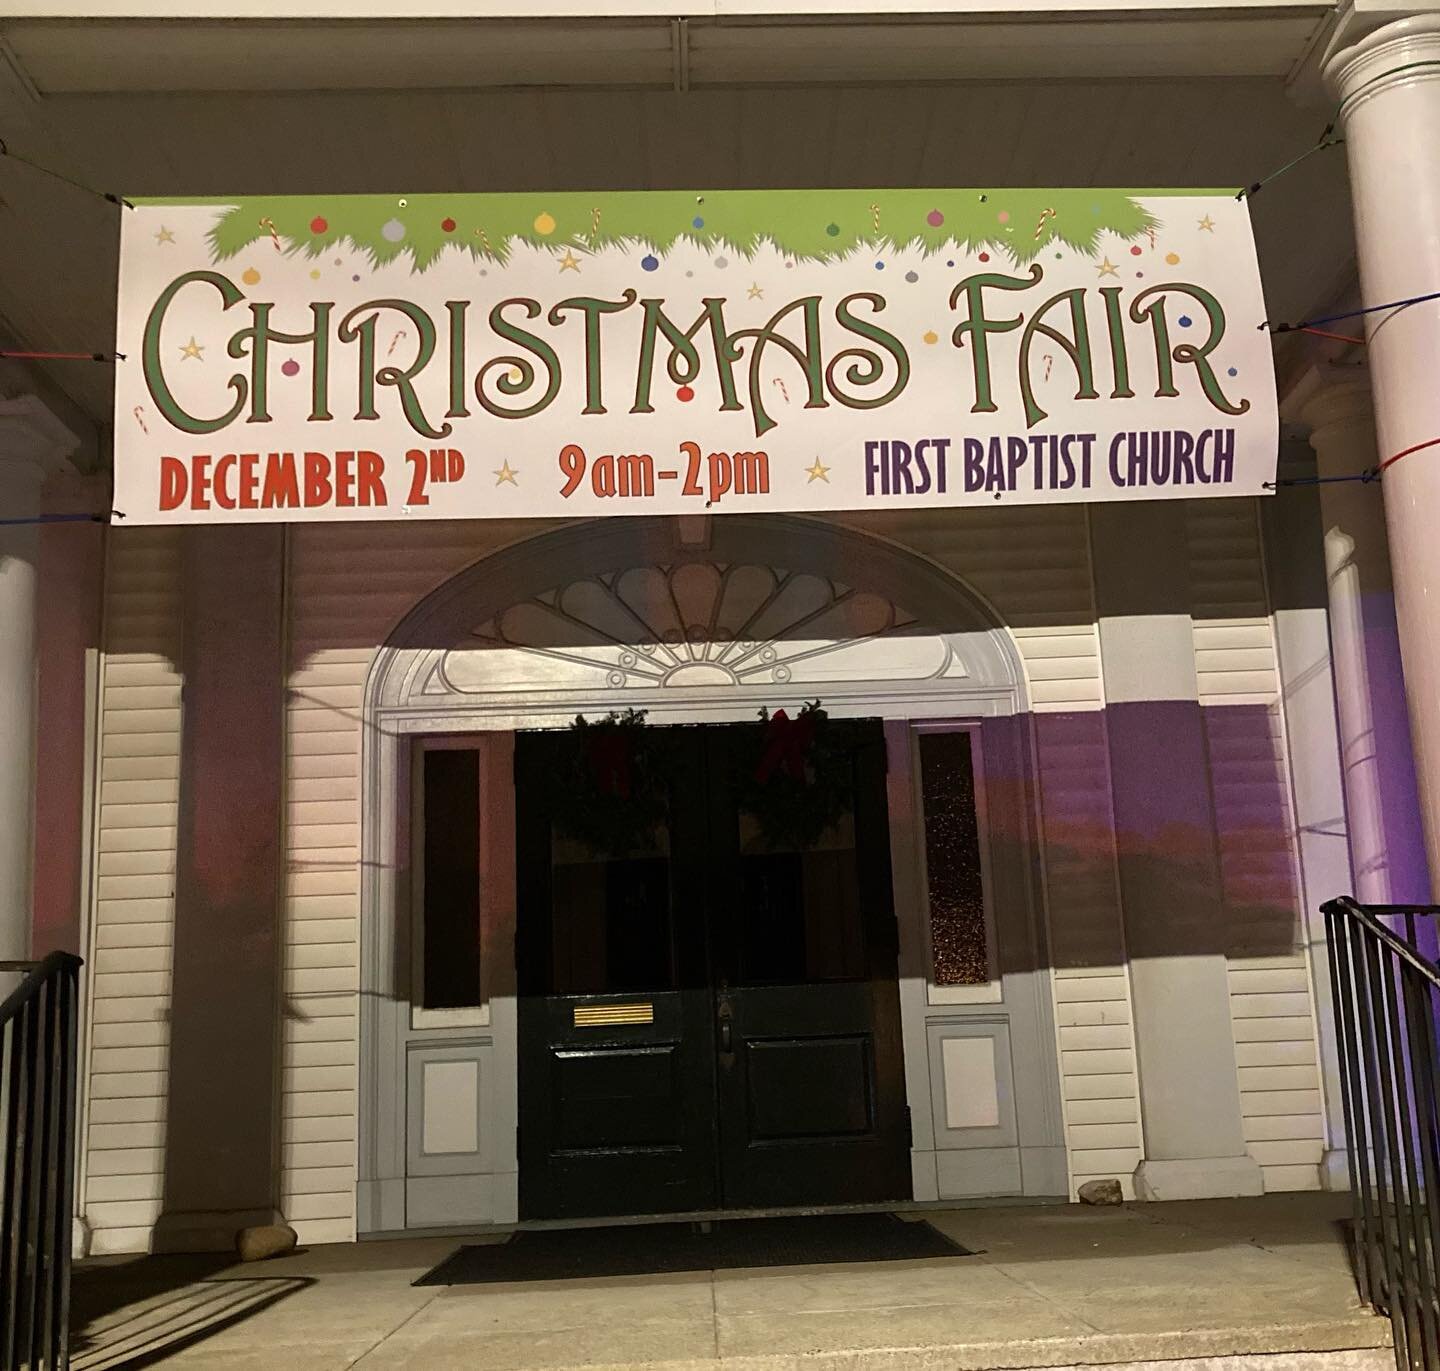 You already know! Come eat, hang out, and buy some unique and handcrafted Christmas gifts from local vendors.